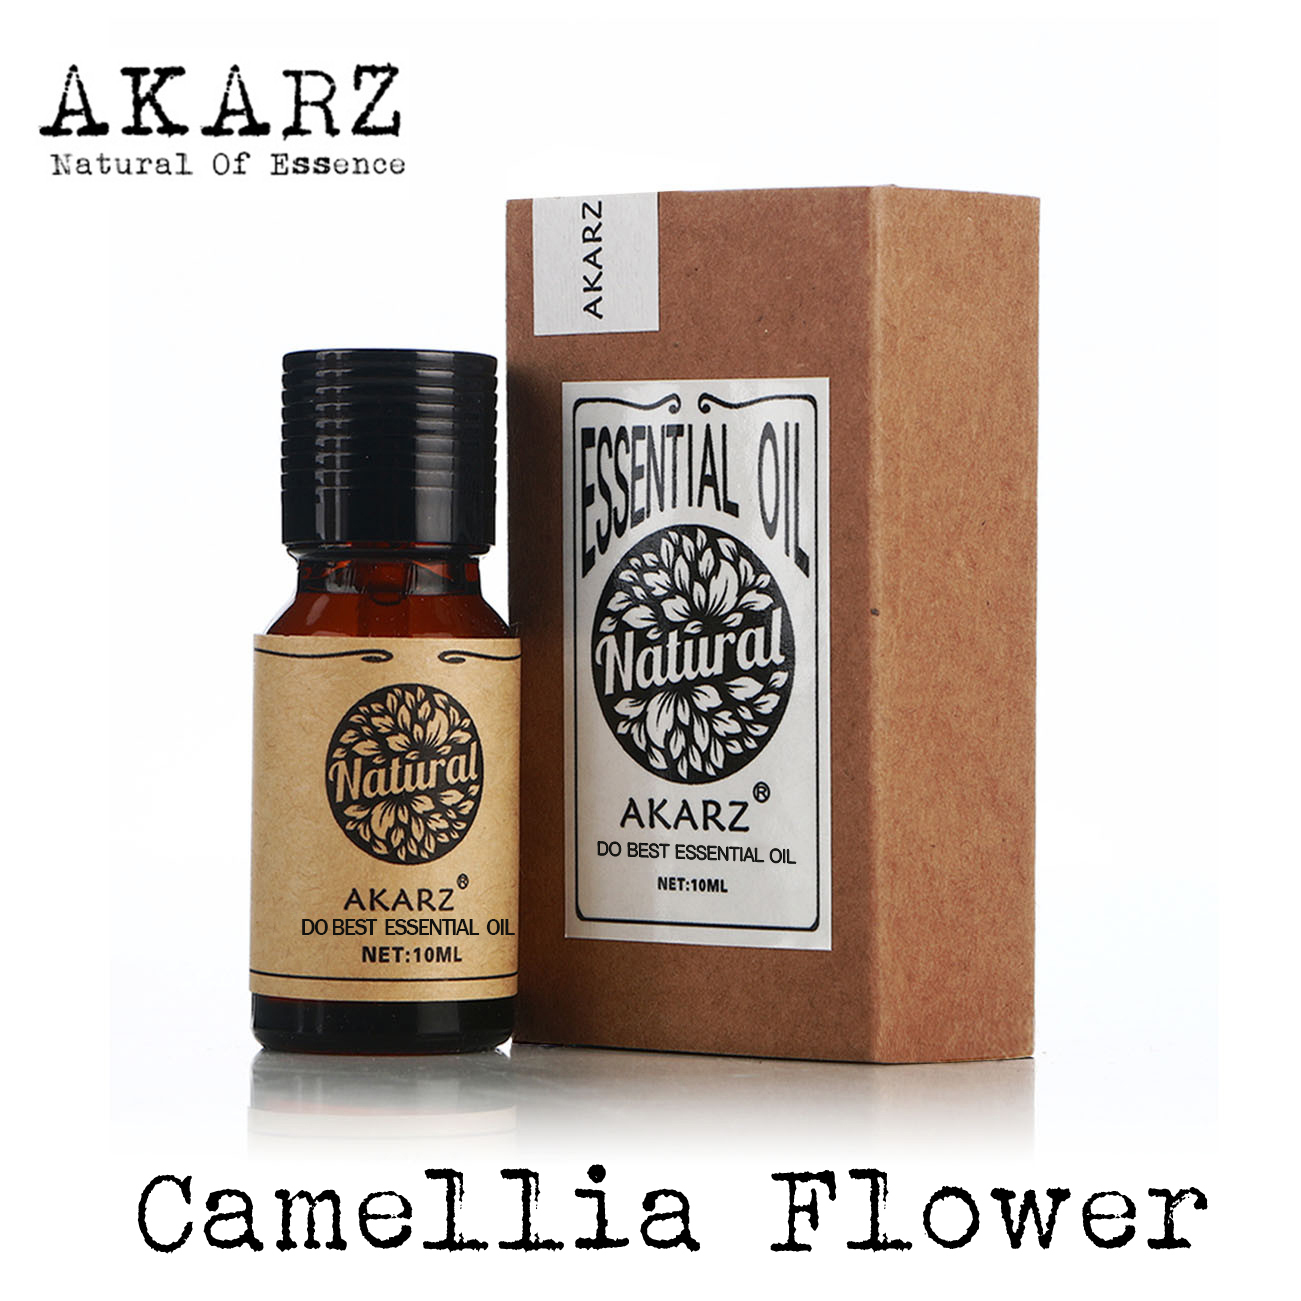 Camellia flower Essential Oil AKARZ brand Oiliness Cosmetics Candle Soap Scents DIY odorant raw material camellia flower Oil